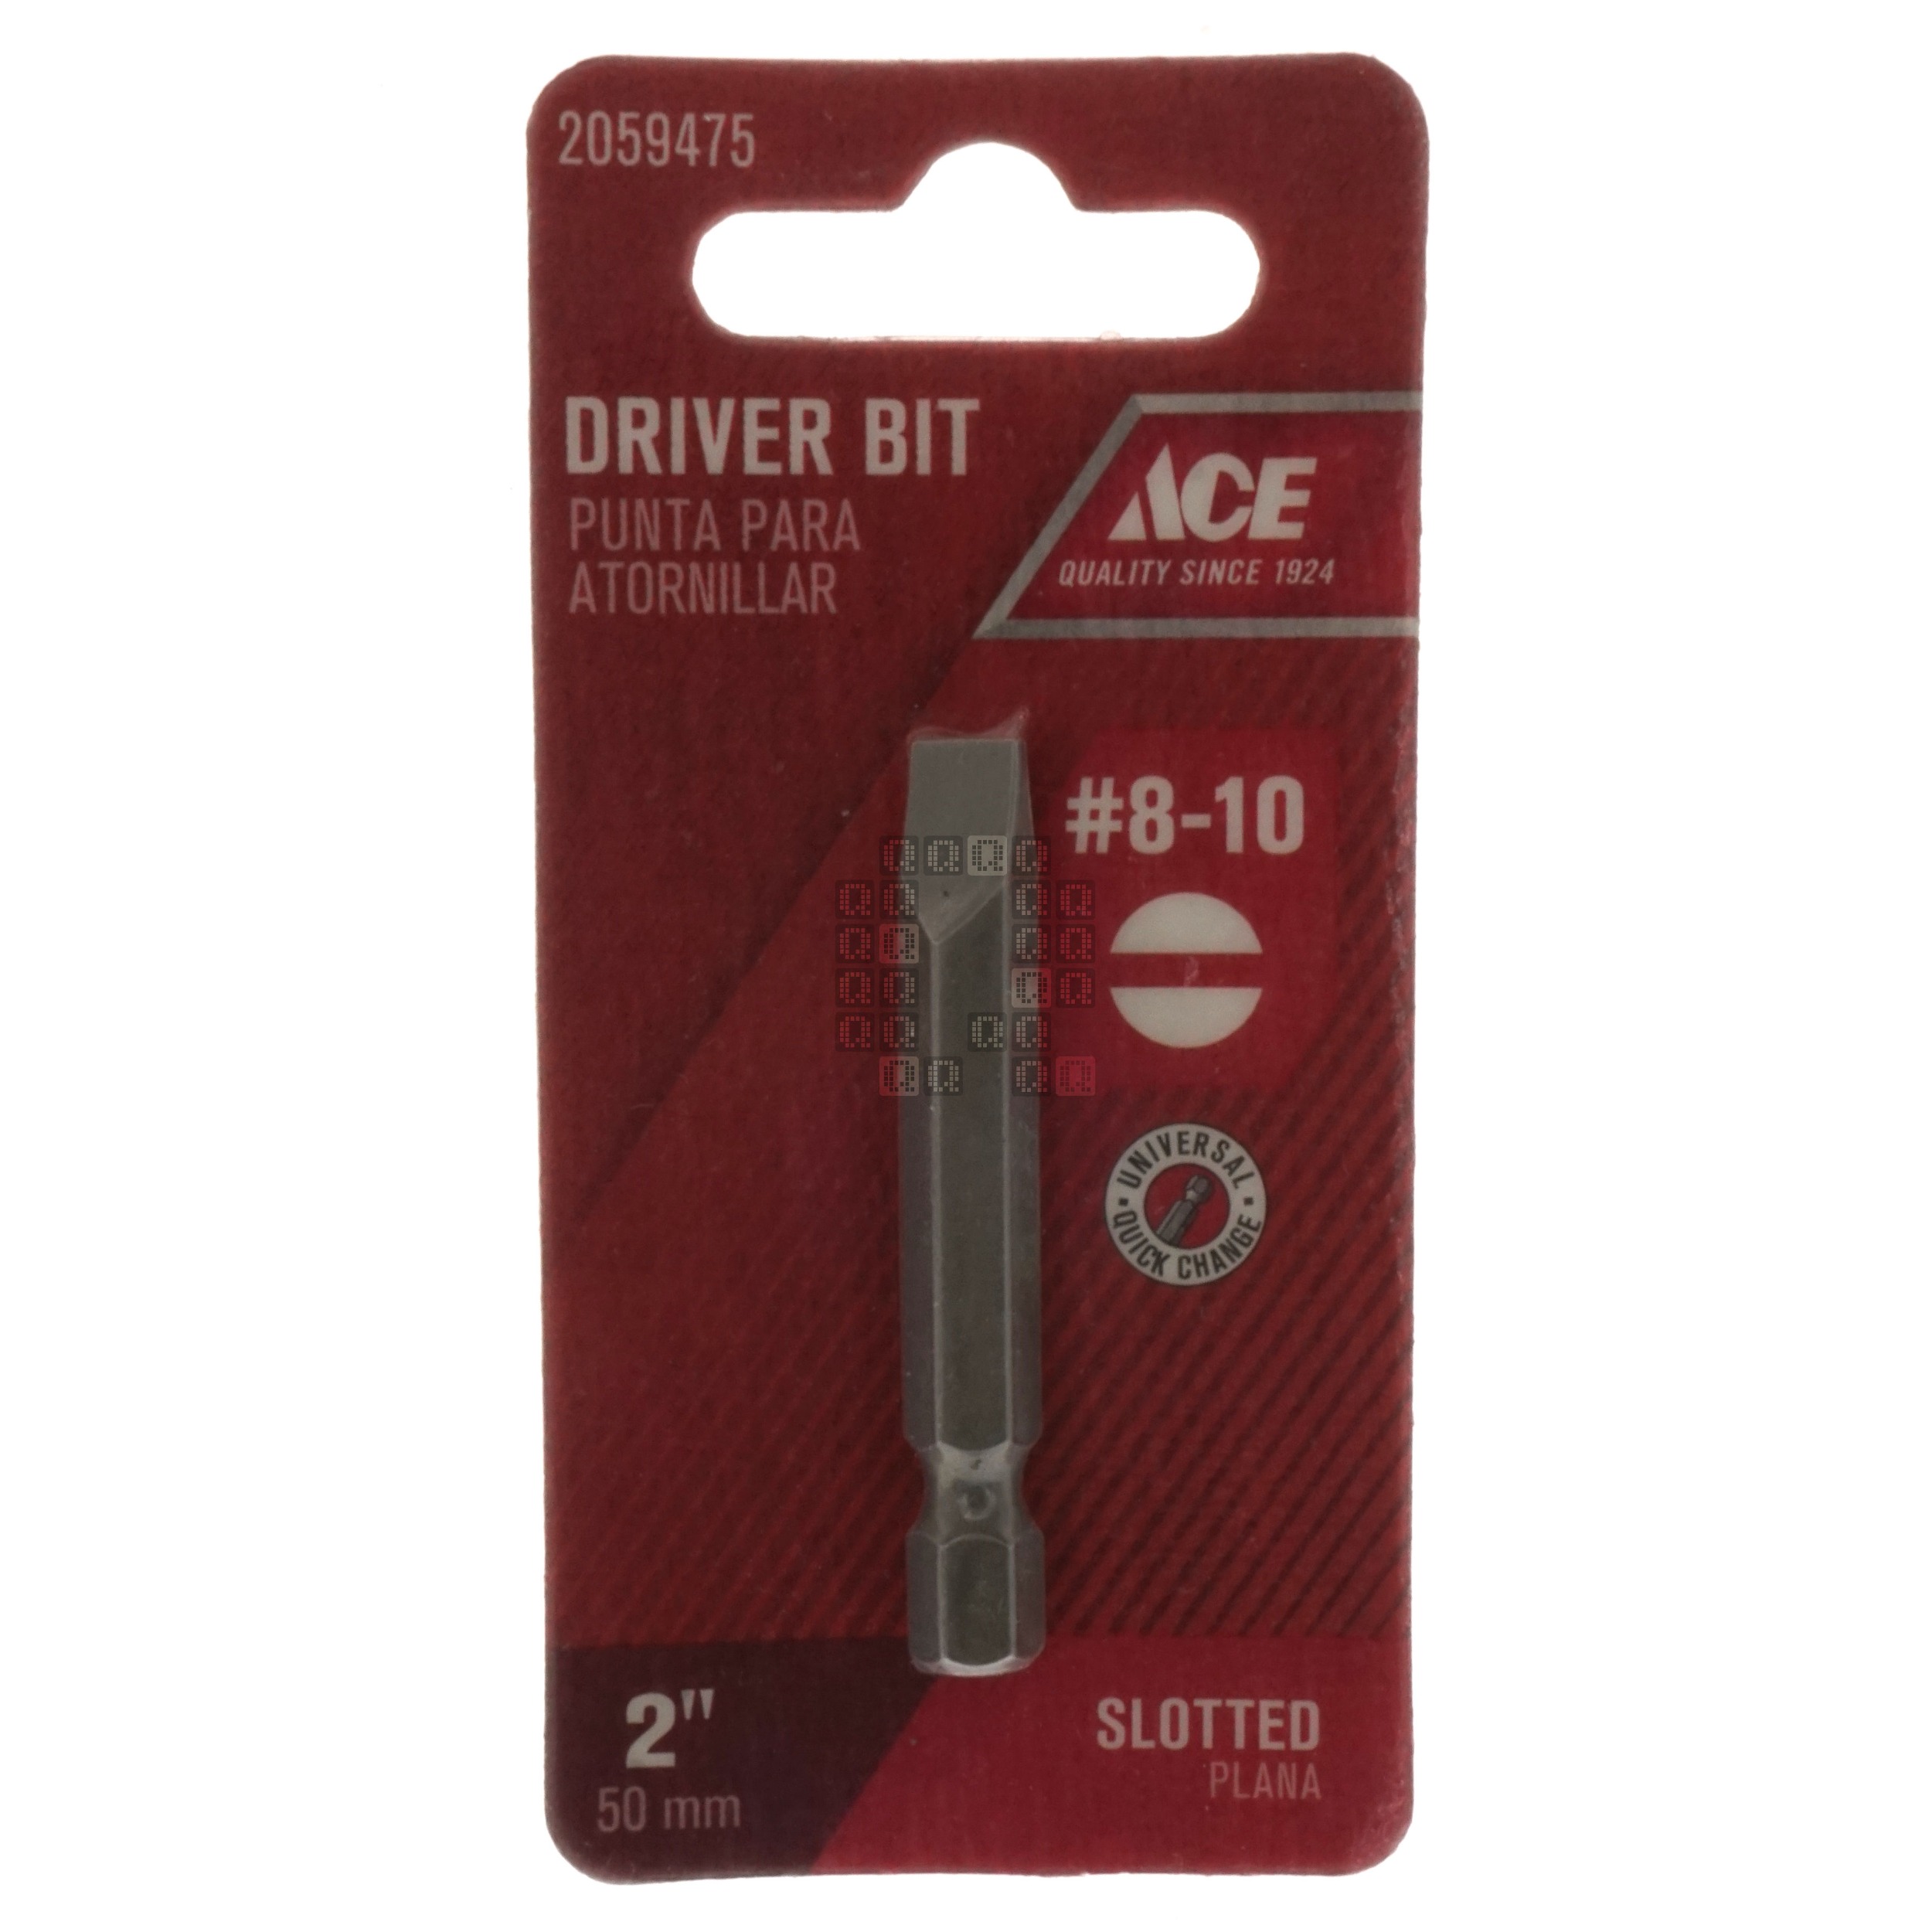 ACE Hardware 2059475 #8-10 Slotted Driver Bit, 2" Length, 1/4" Hex Drive